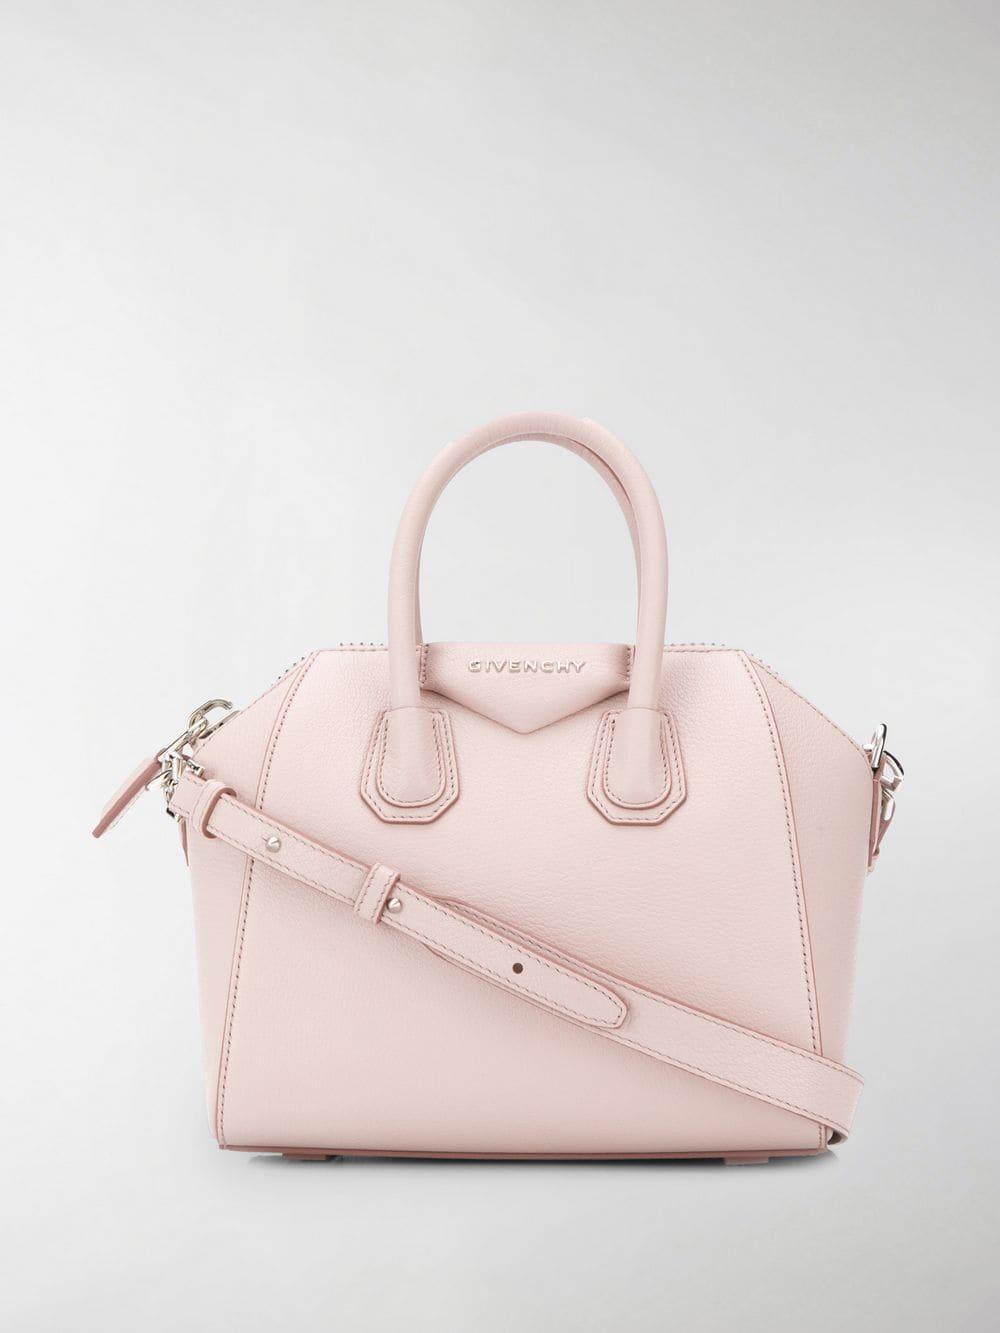 Givenchy Leather Small Antigona Tote Bag in Pink - Lyst